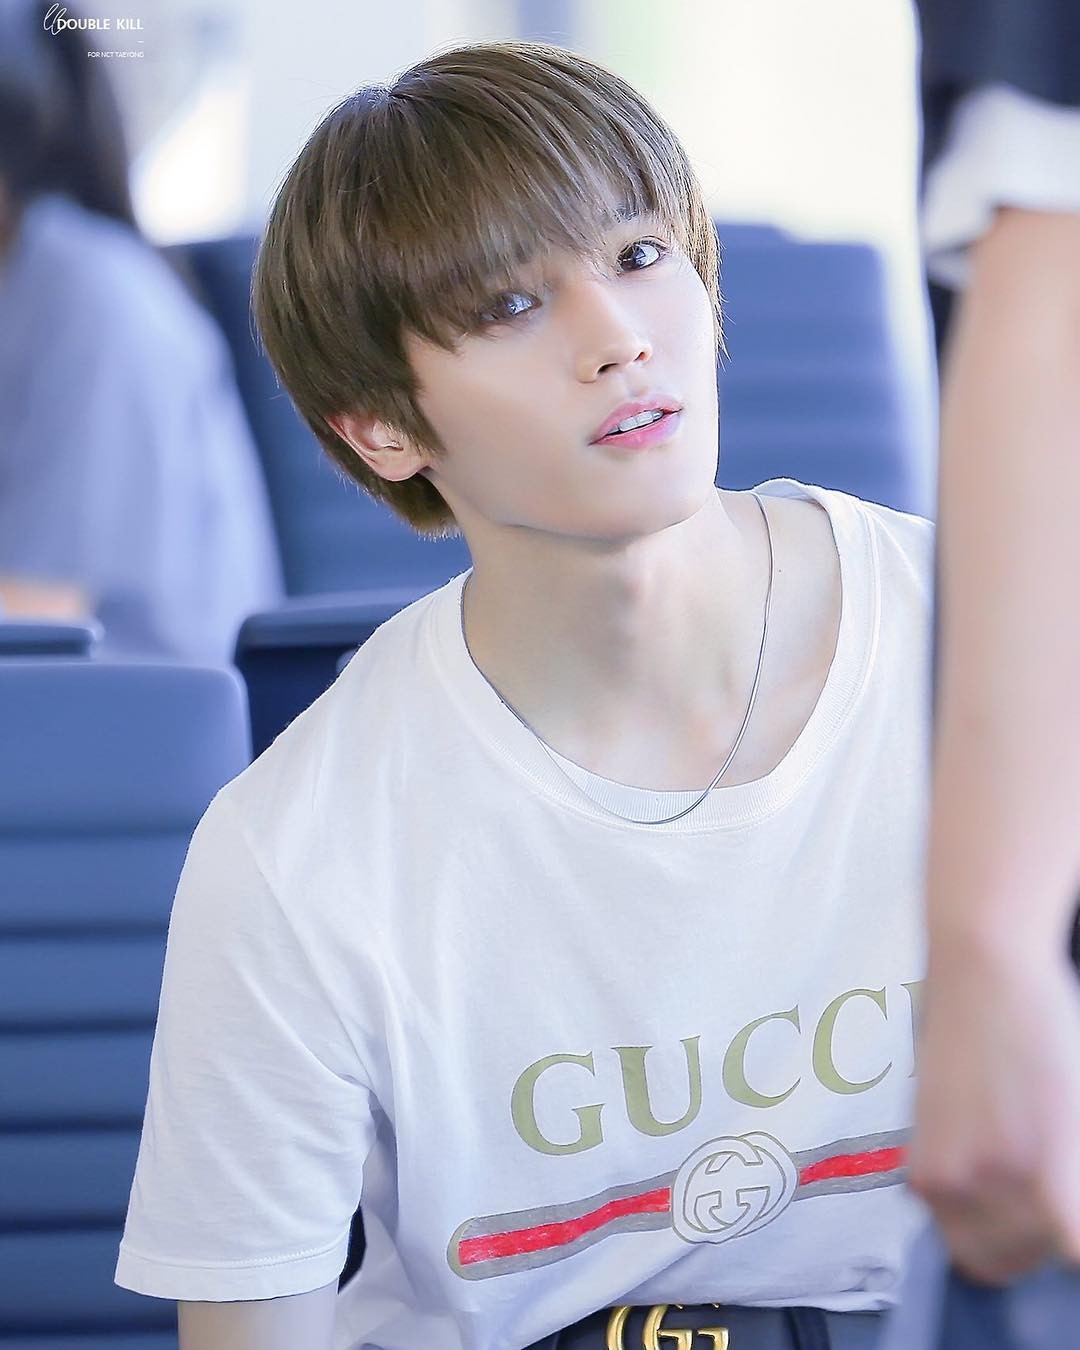 K-pop star Taeyong, a member of boy band NCT, is known for his stylish fashion sense. Photo: taeyongsment/Instagram